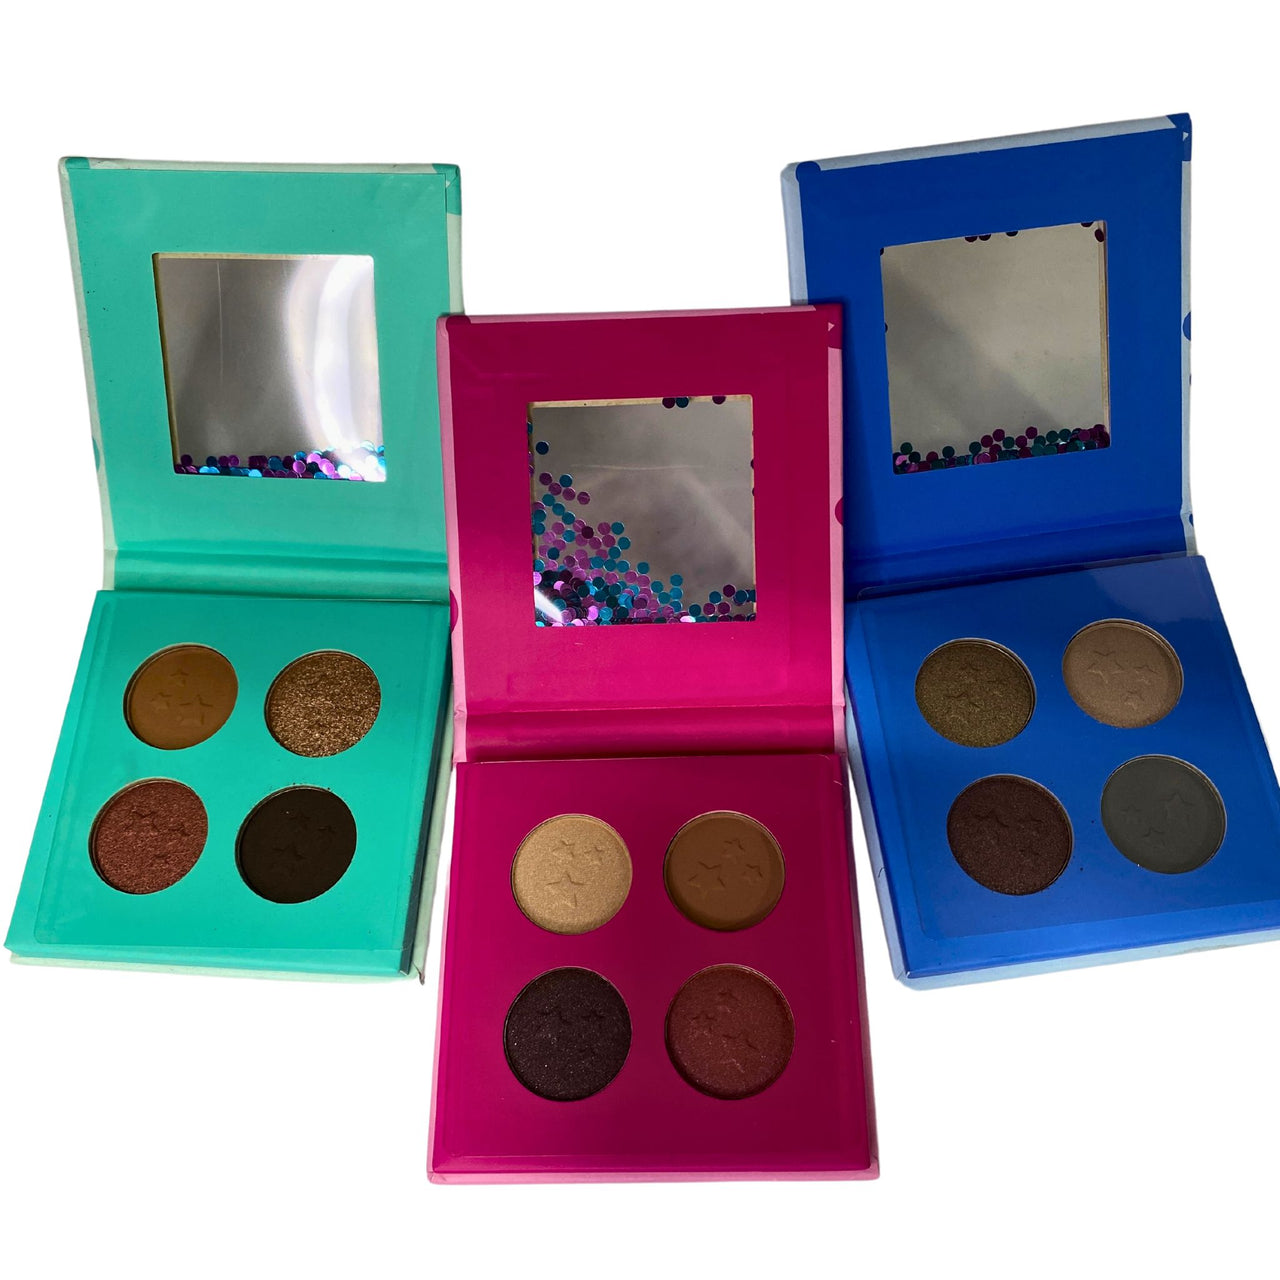 Poparazzi Mix Includes Eye Shadow Palettes , Mini Nail Files 3 Pack & Glitter Eye Brushes